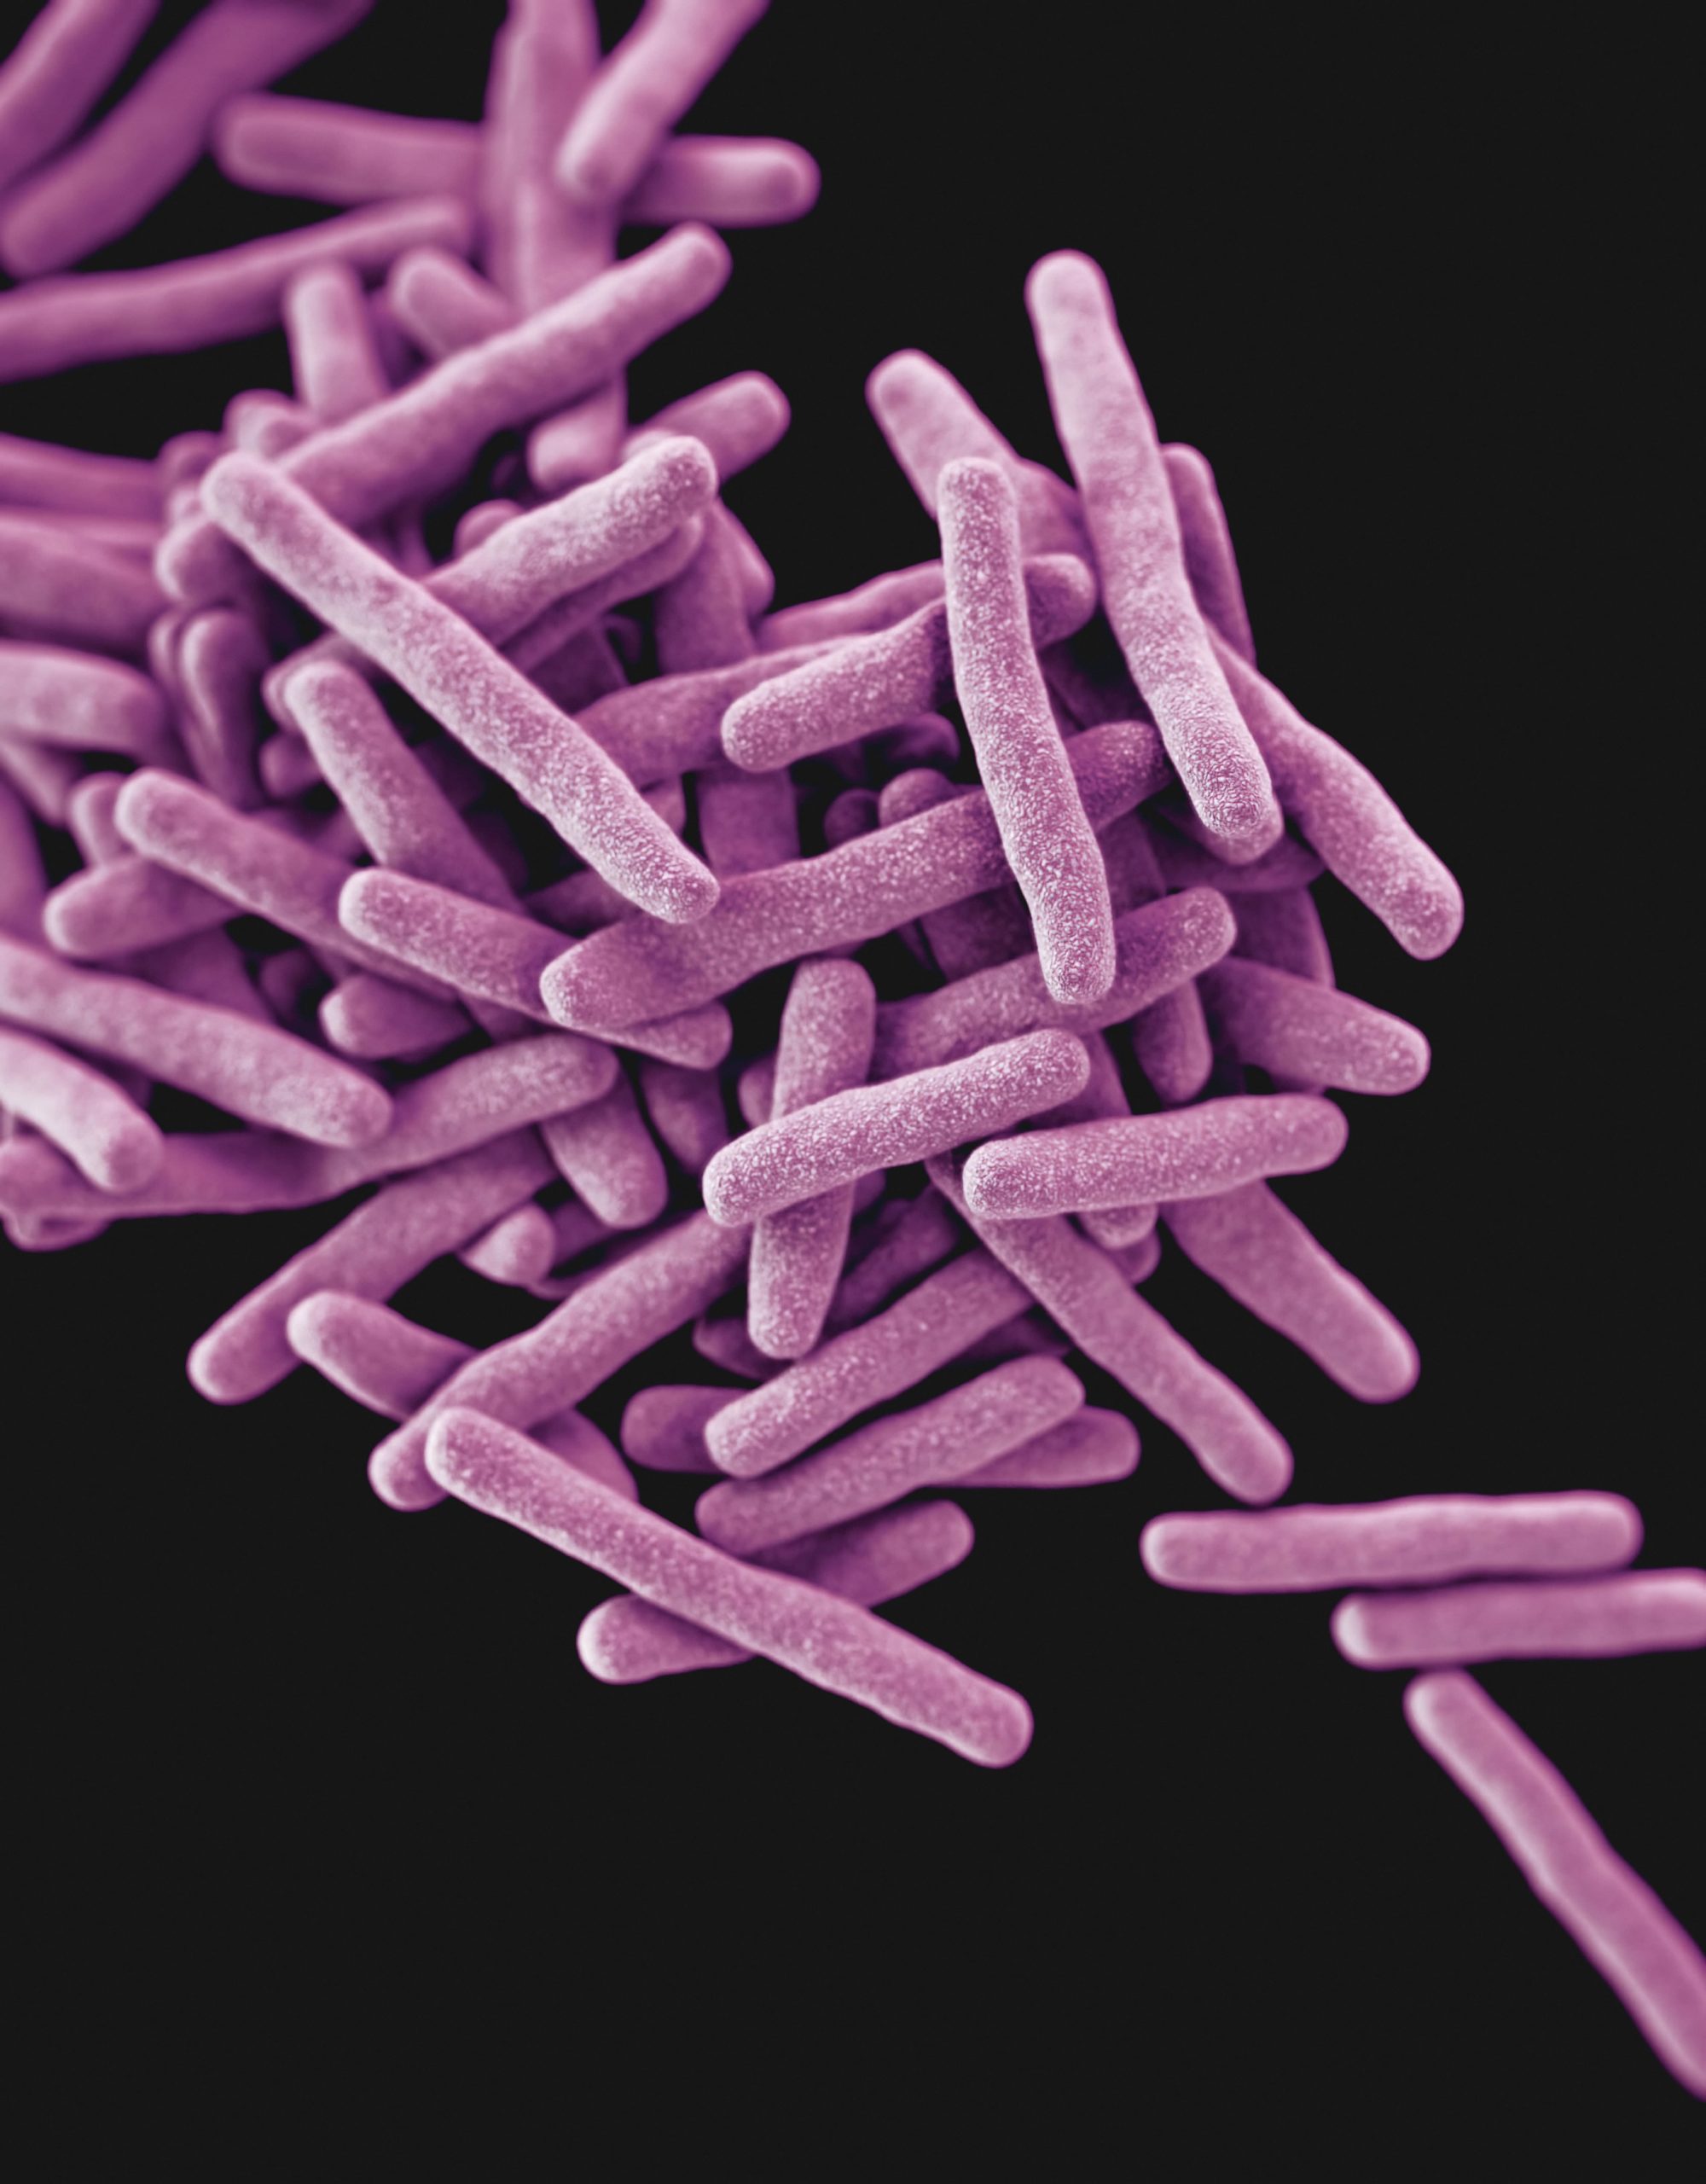 Drug-resistant, Mycobacterium tuberculosis bacteria, the pathogen responsible for causing the disease tuberculosis (TB). A 3D computer-generated image.